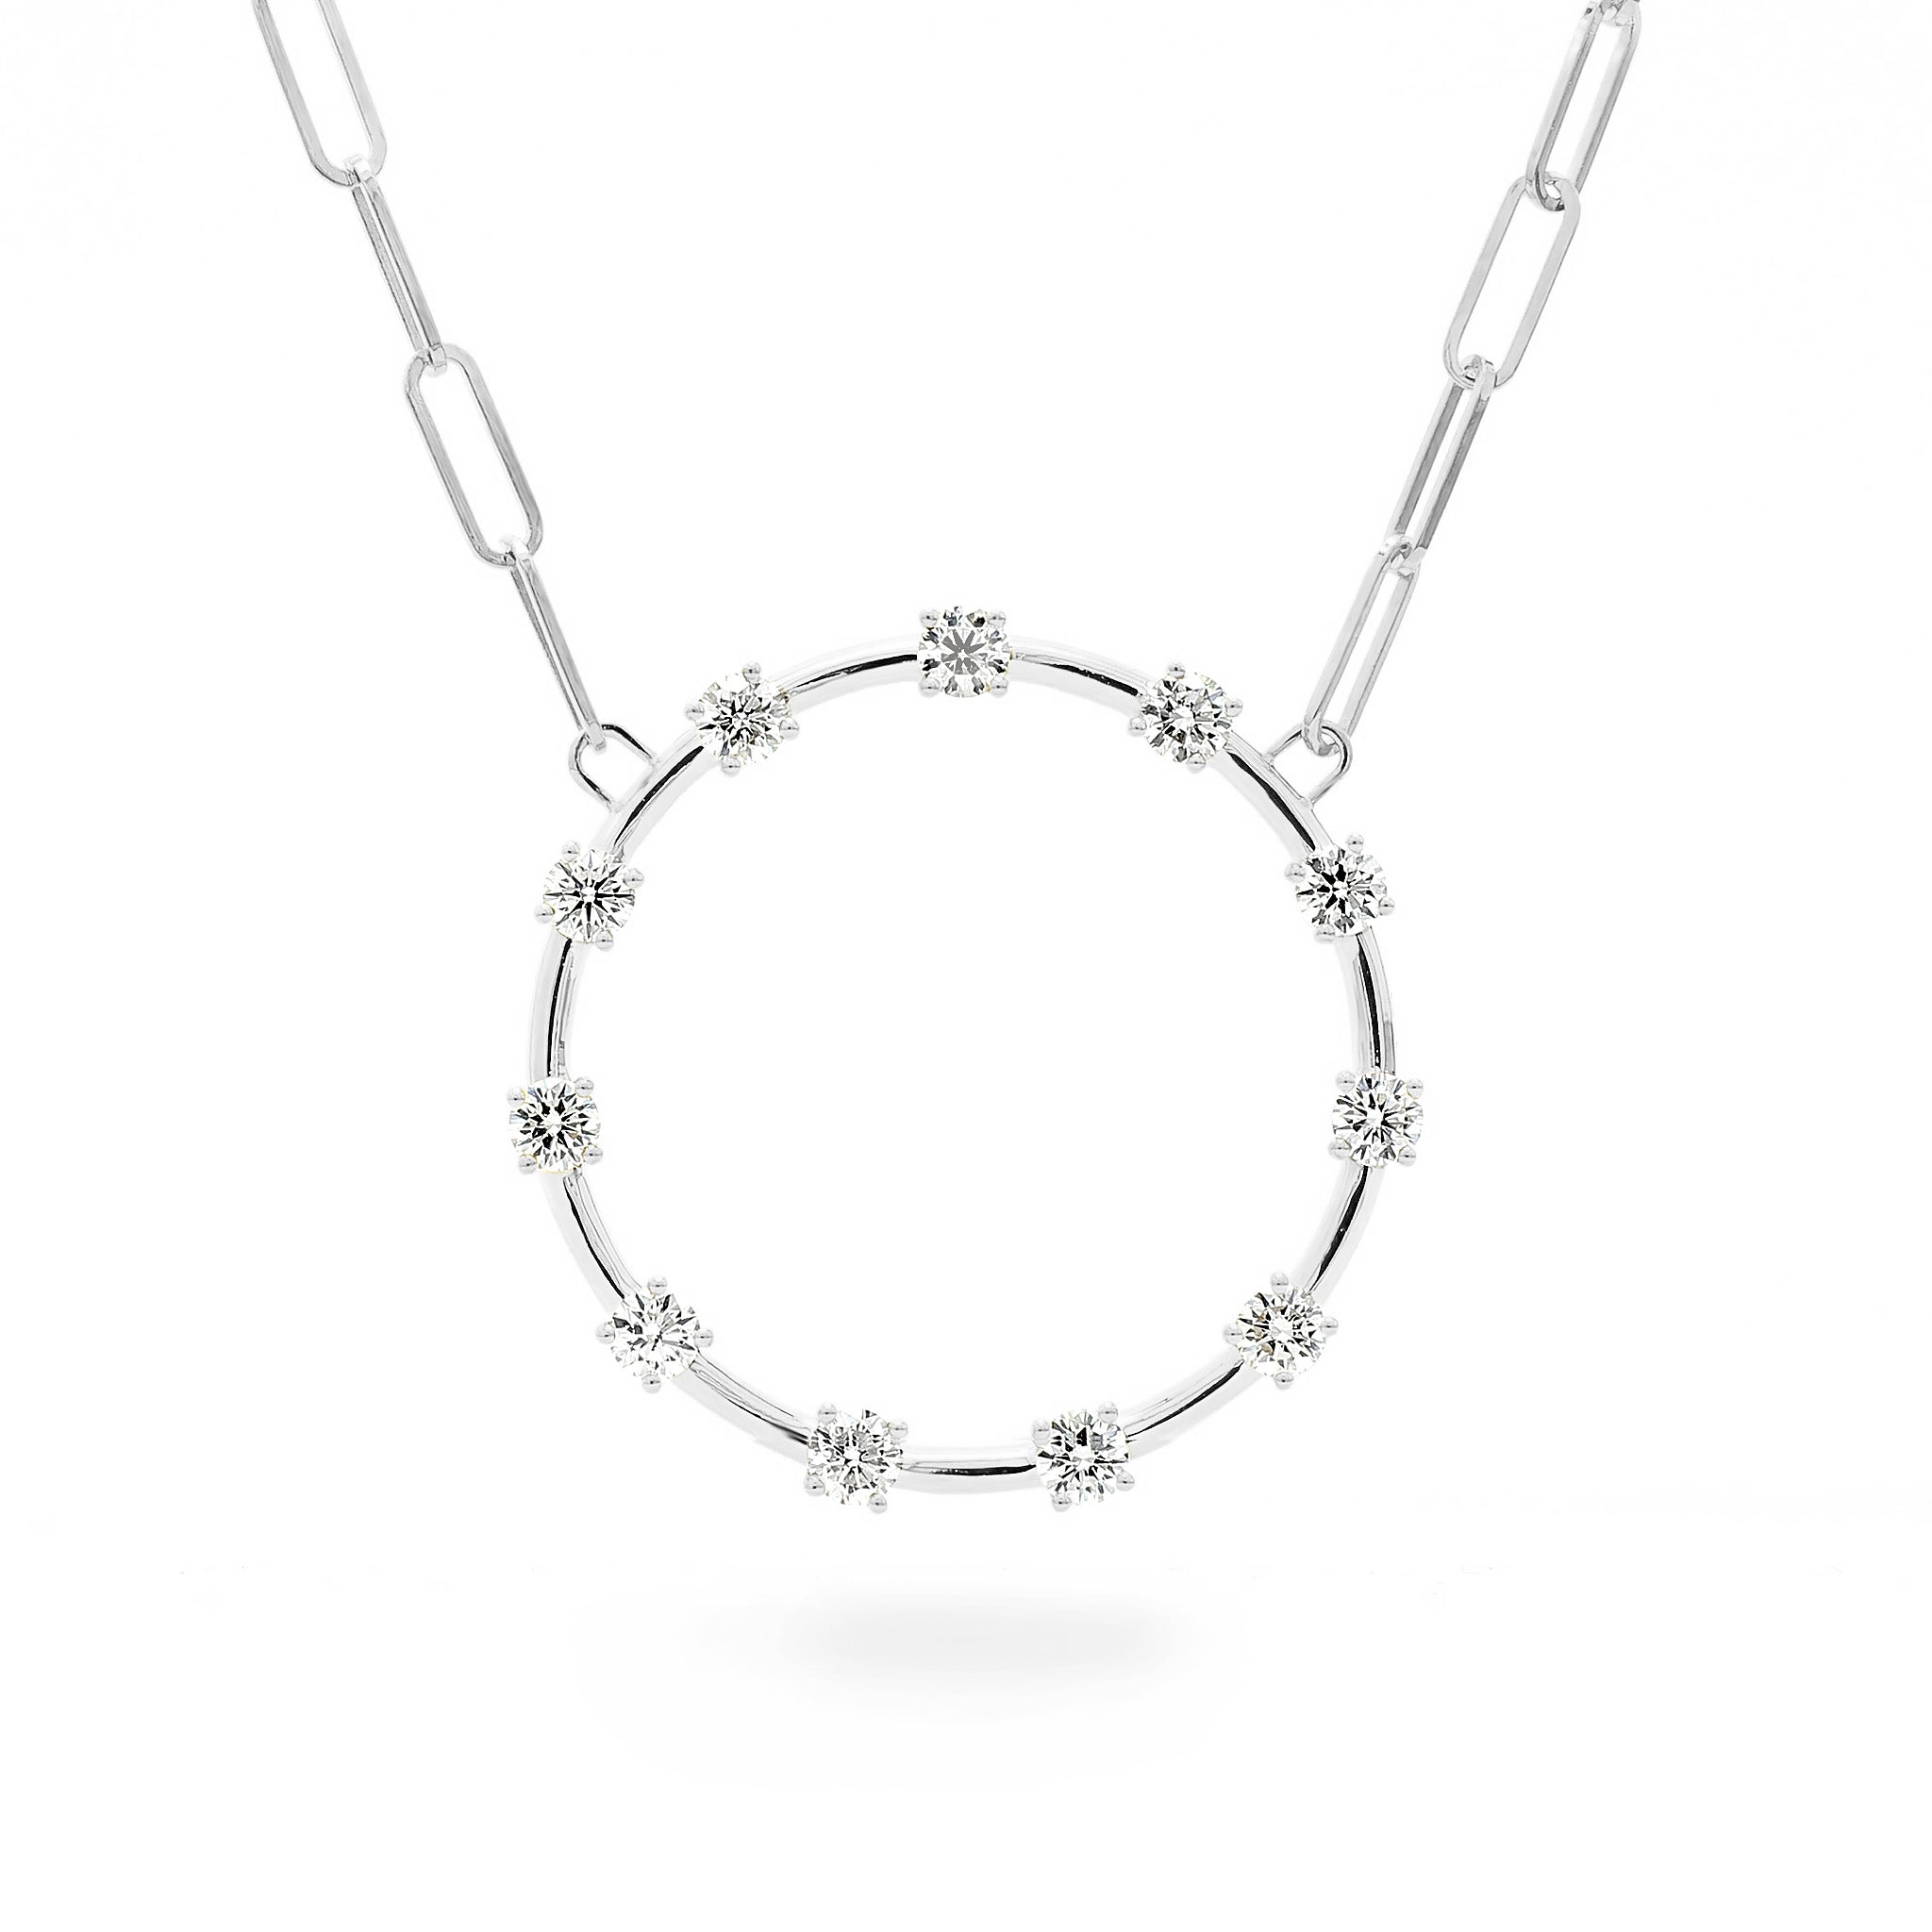 Shimansky - Crescent Diamond Necklace 1.00ct crafted in 14K White Gold